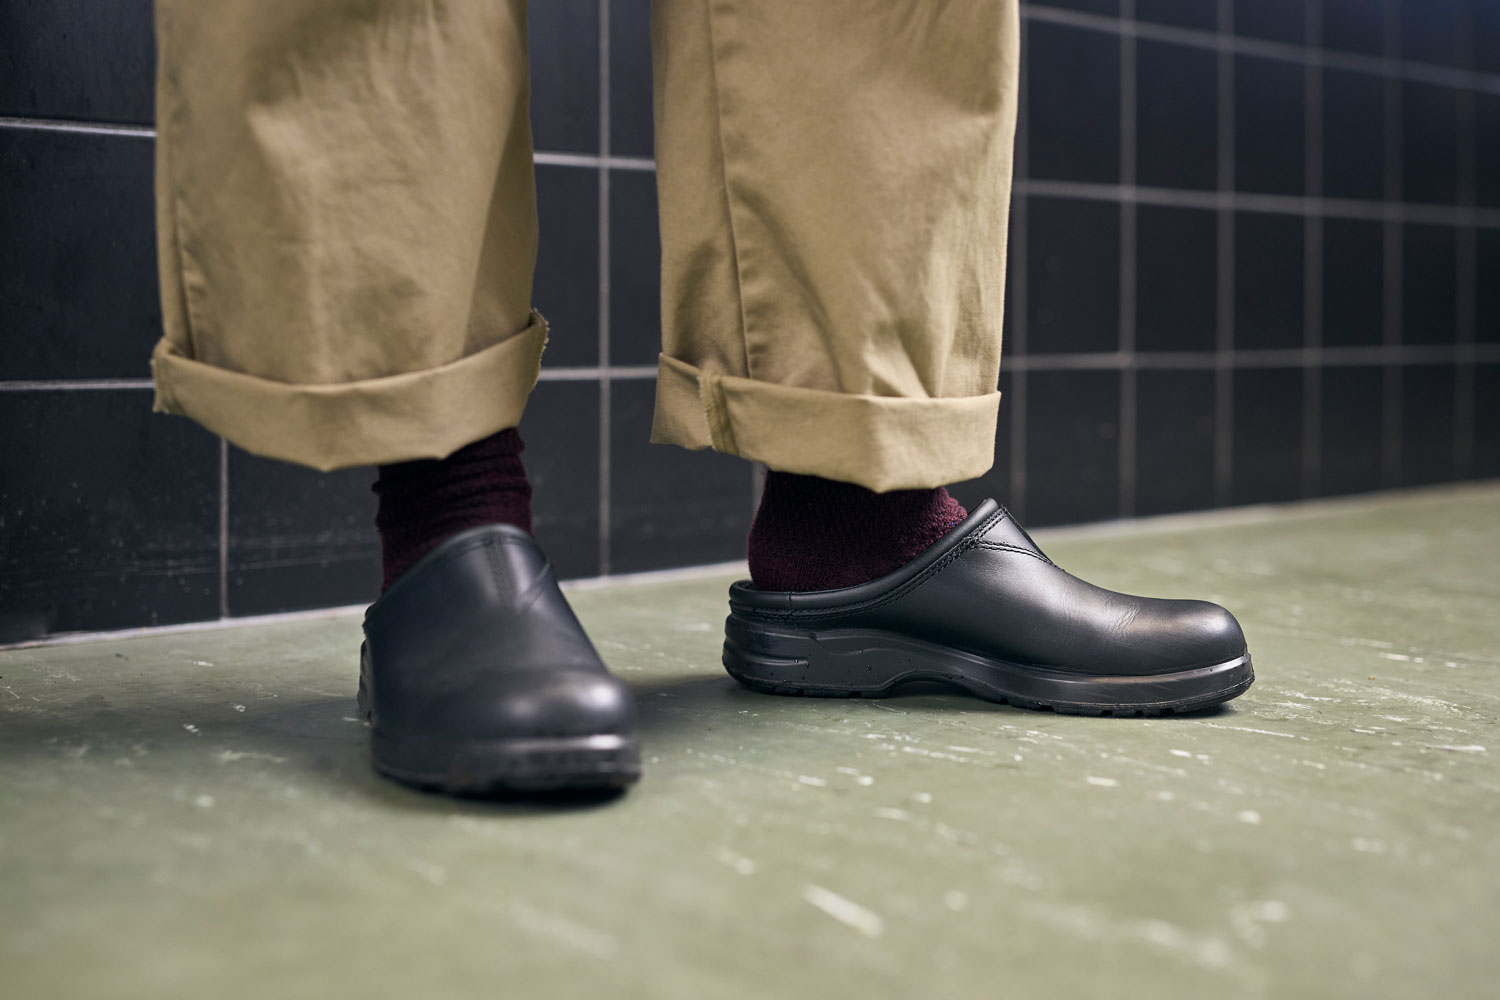 Say Yes Chef to the New Blundstone All-Terrain Clog | Field Mag